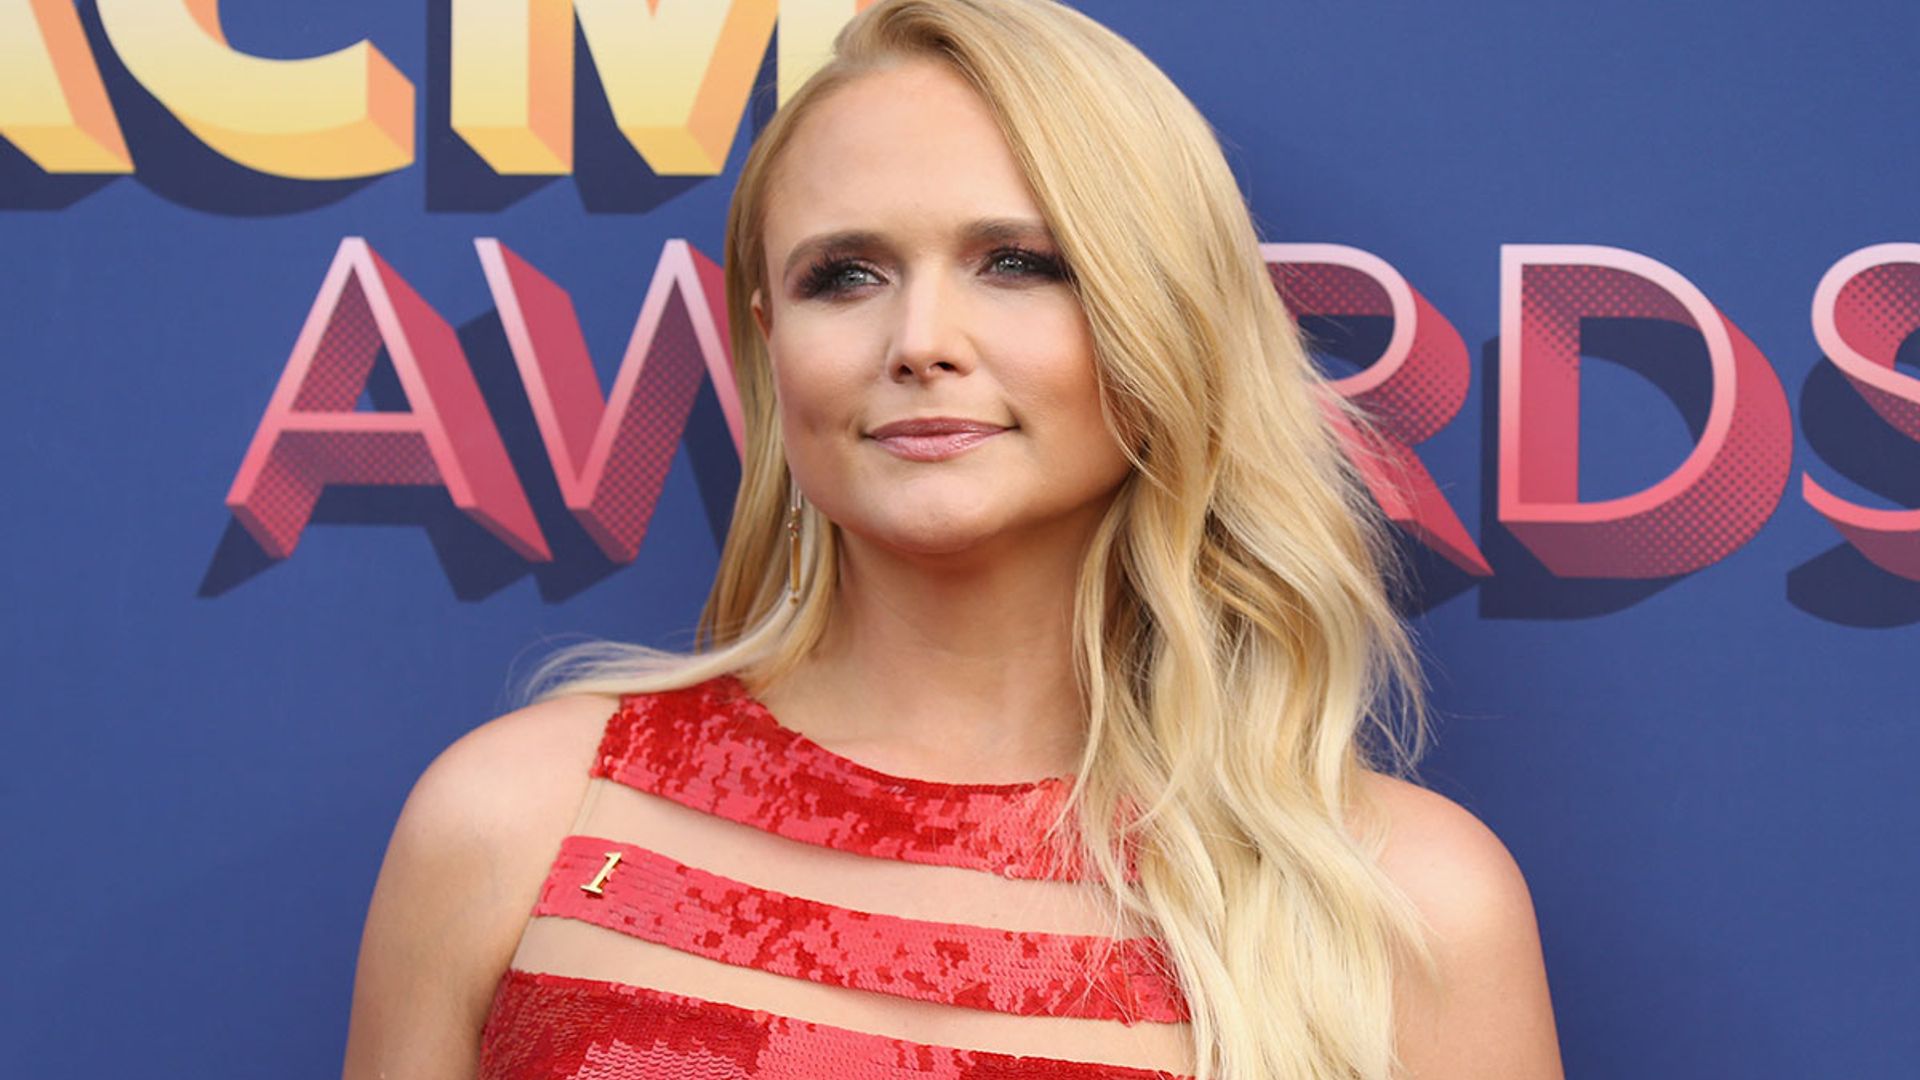 Miranda Lambert delivers huge surprise just in time for the New Year